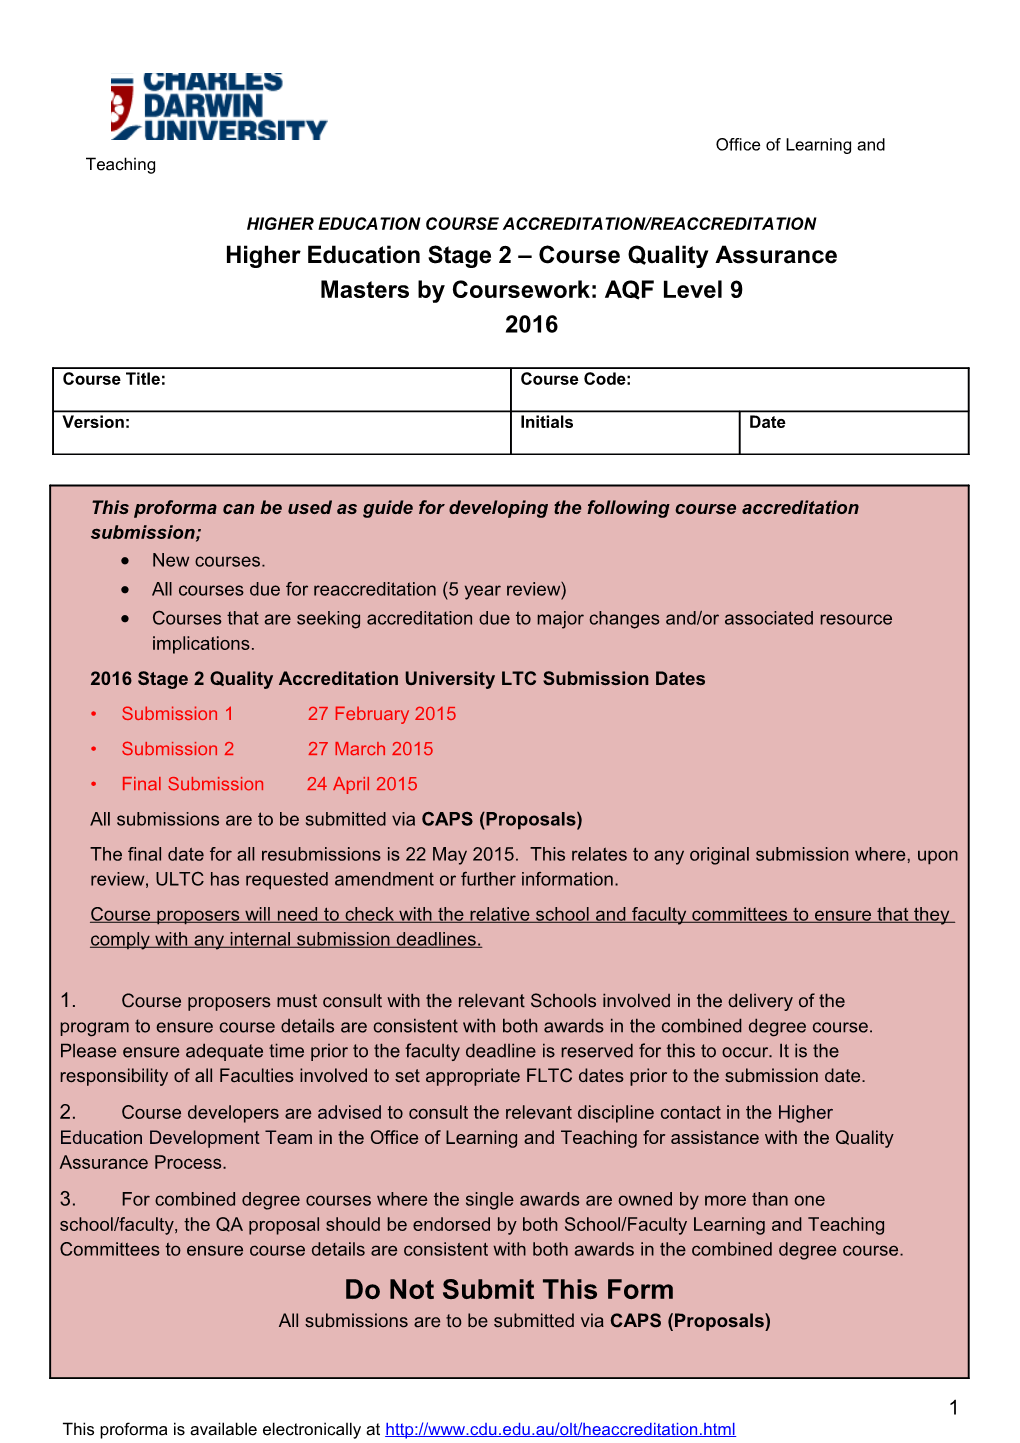 Higher Education Course Accreditation/Reaccreditation